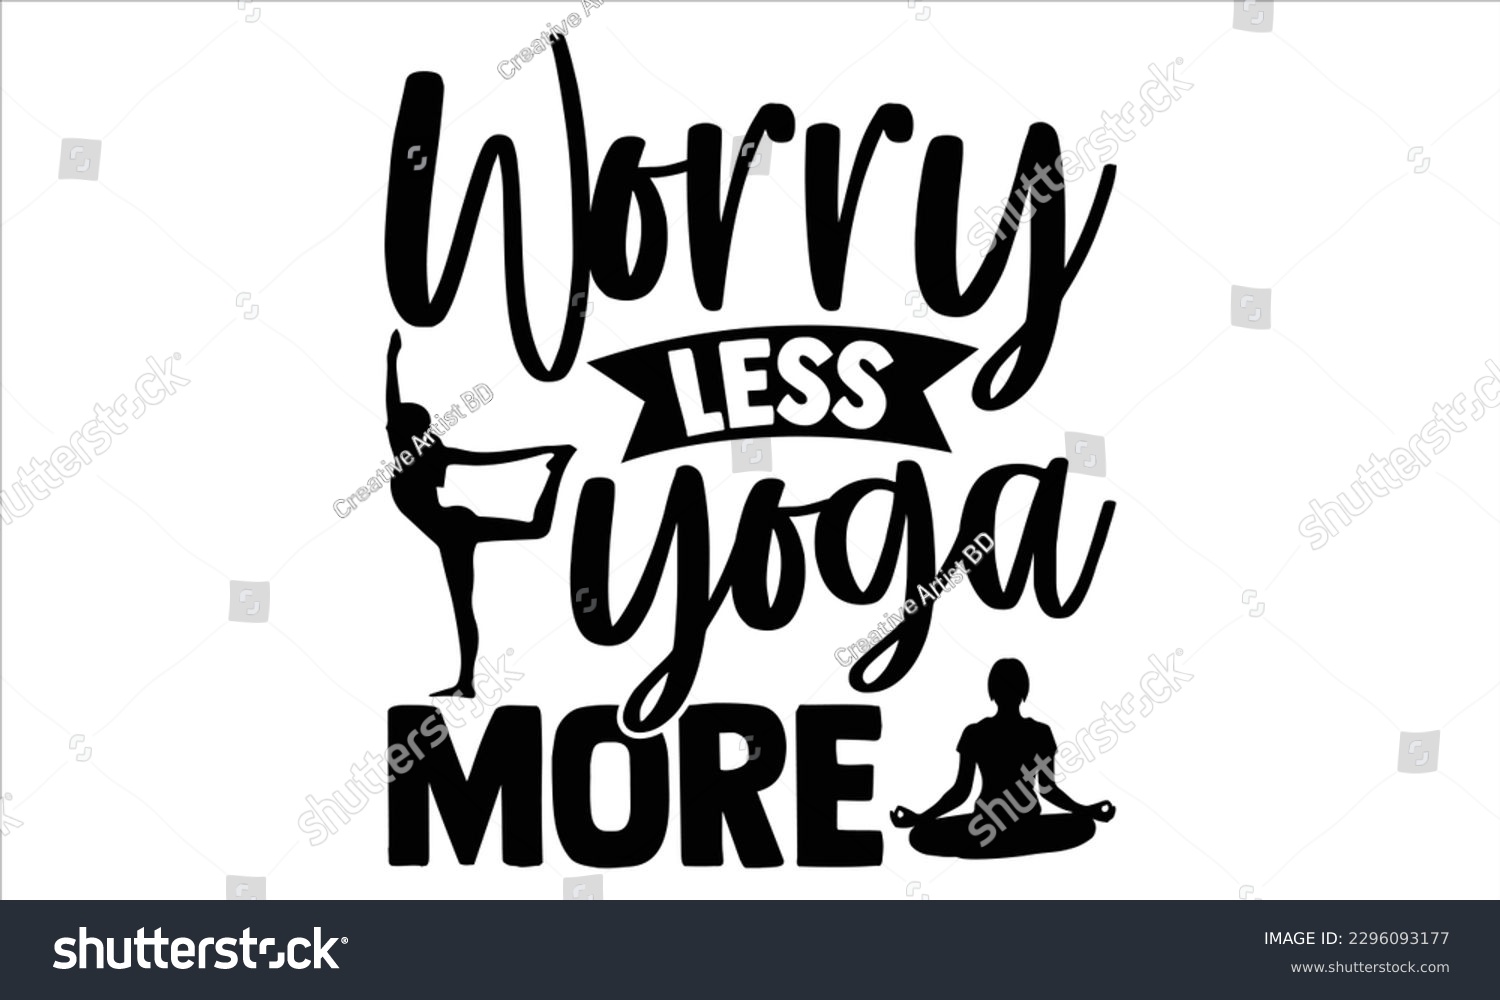 SVG of Worry less yoga more  - Yoga Day T Shirt Design, Hand drawn lettering and calligraphy, Cutting Cricut and Silhouette, svg file, poster, banner, flyer and mug. svg